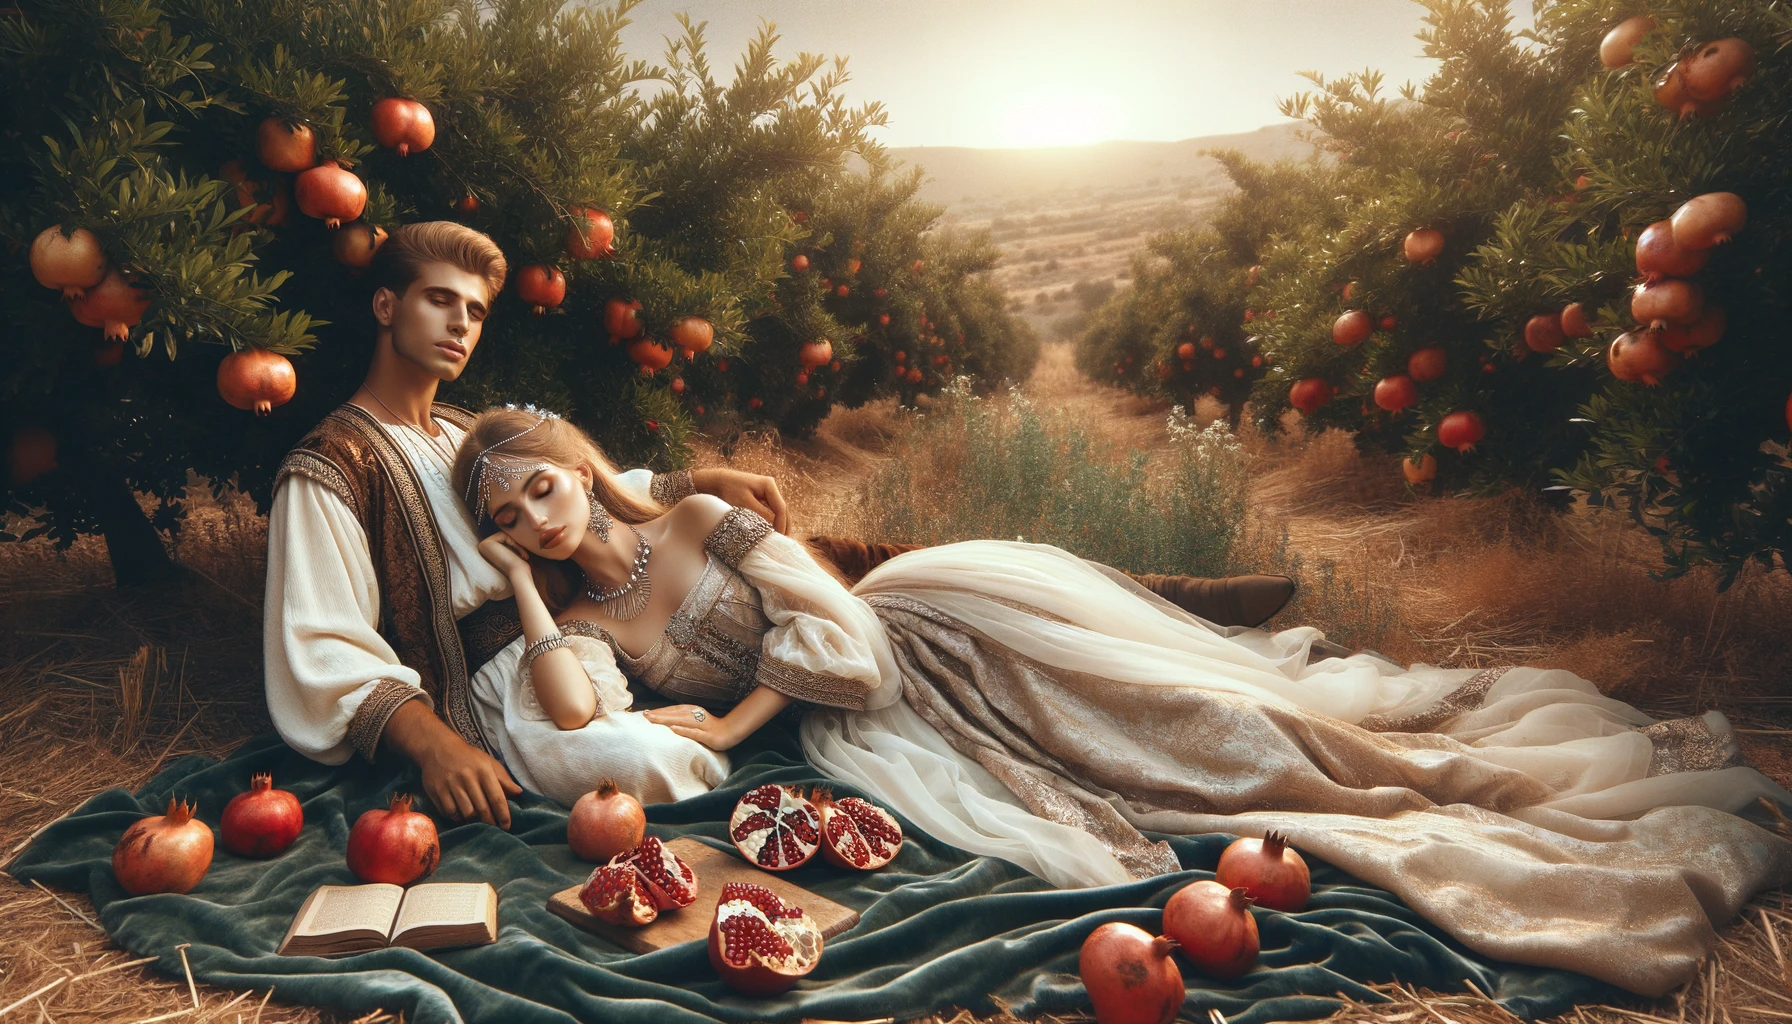 Ark.au Illustrated Bible - Song of Solomon 7:12 - Let's go early up to the vineyards. Let's see whether the vine has budded, Its blossom is open, And the pomegranates are in flower. There I will give you my love.